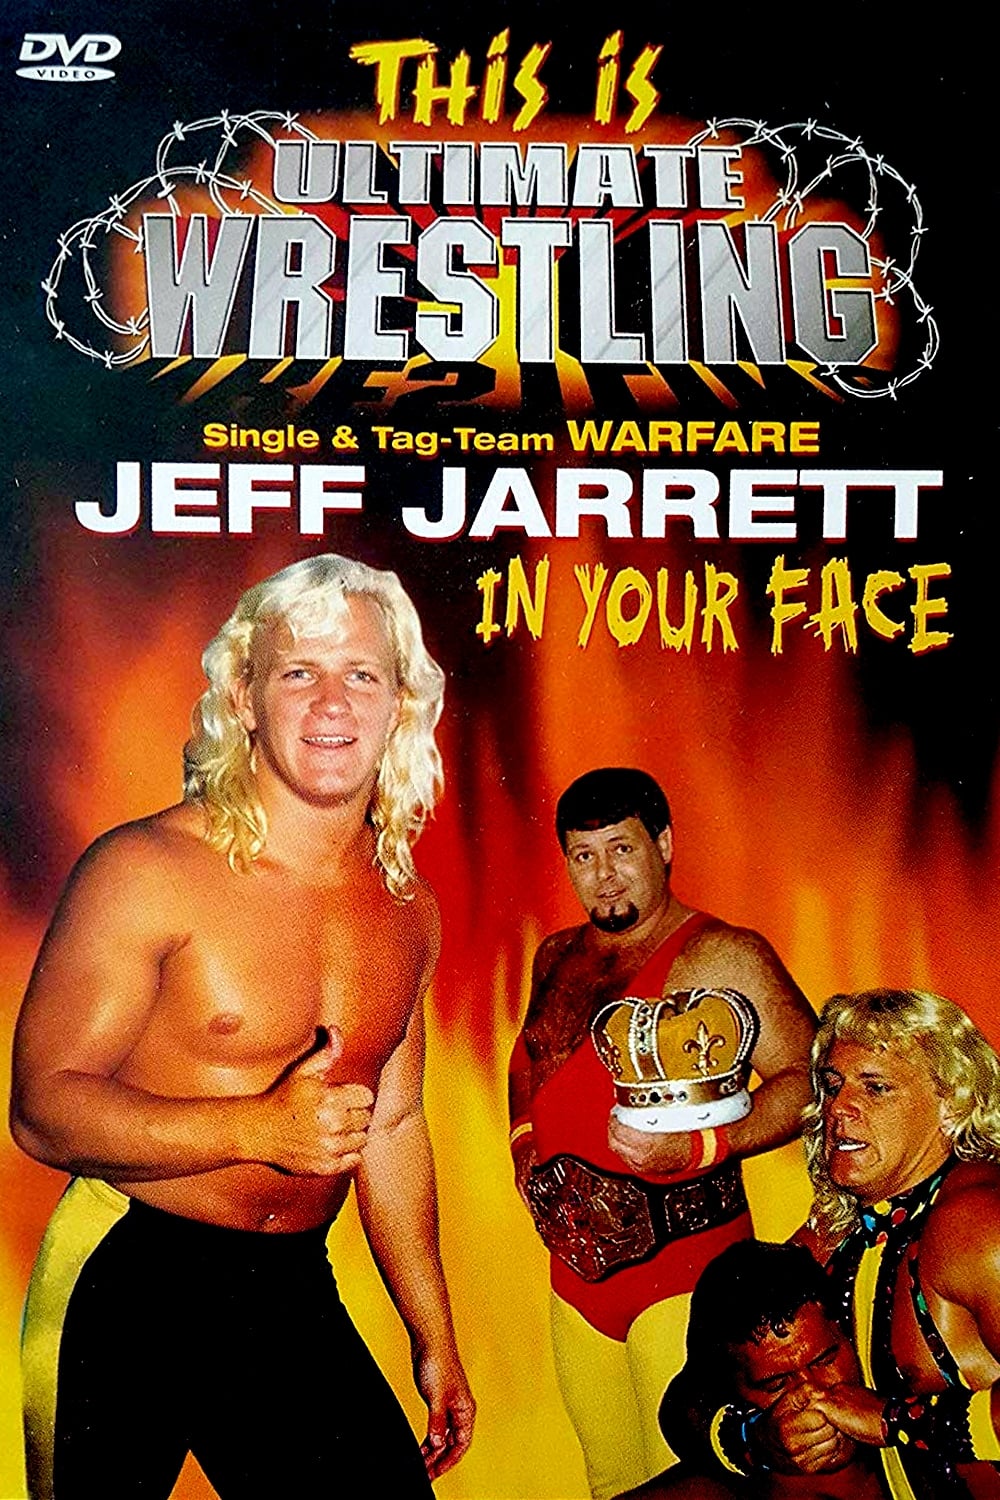 This is Ultimate Wrestling: Jeff Jarrett - In Your Face